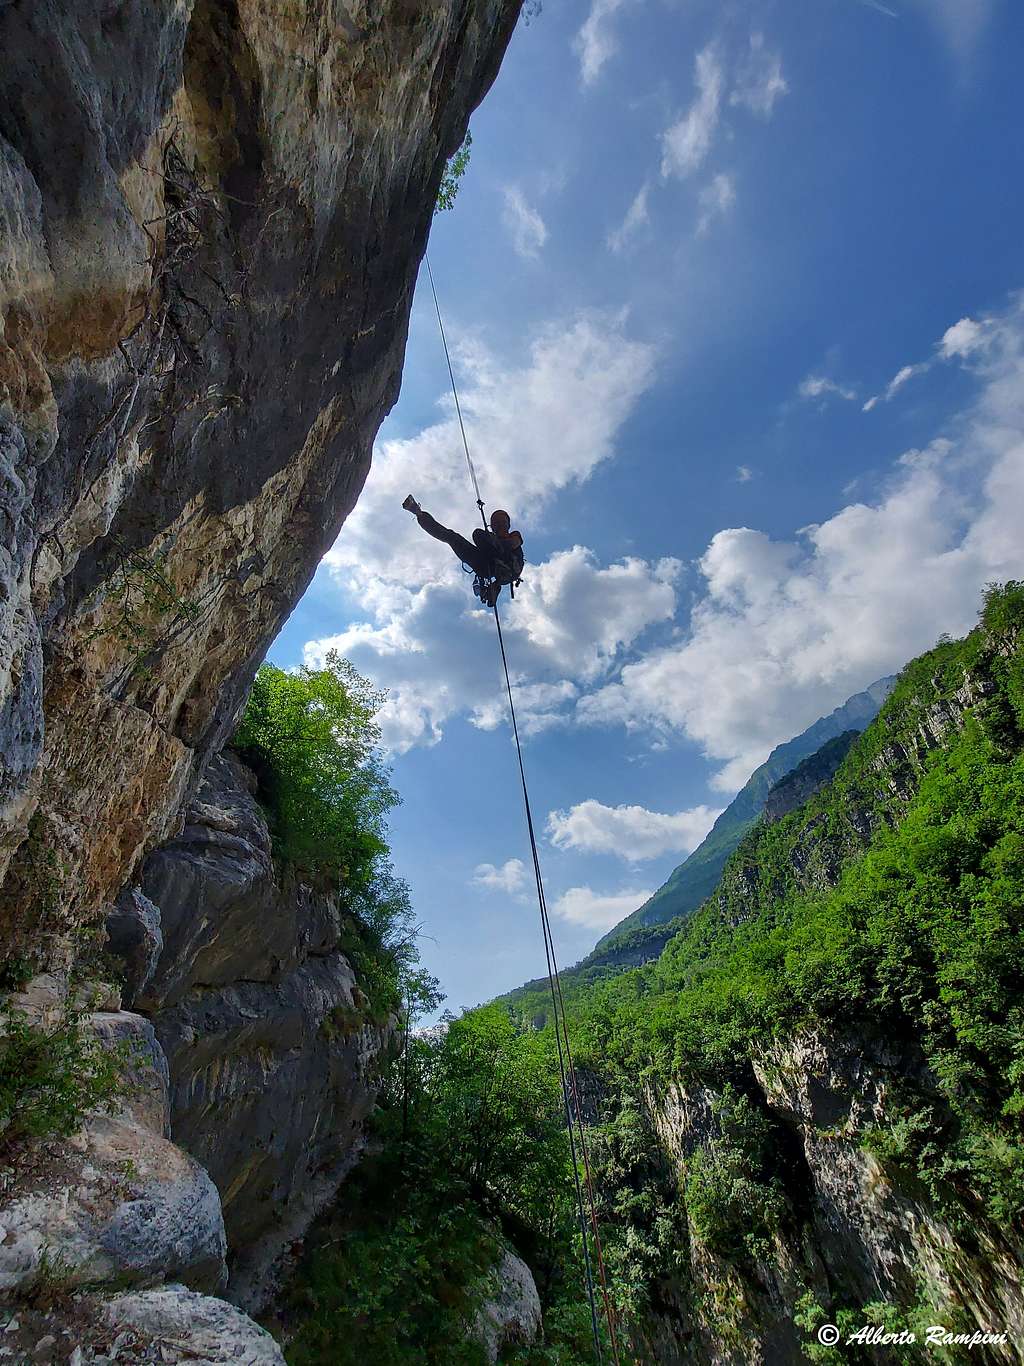 Abseil on The Passenger, Limarò Canyon